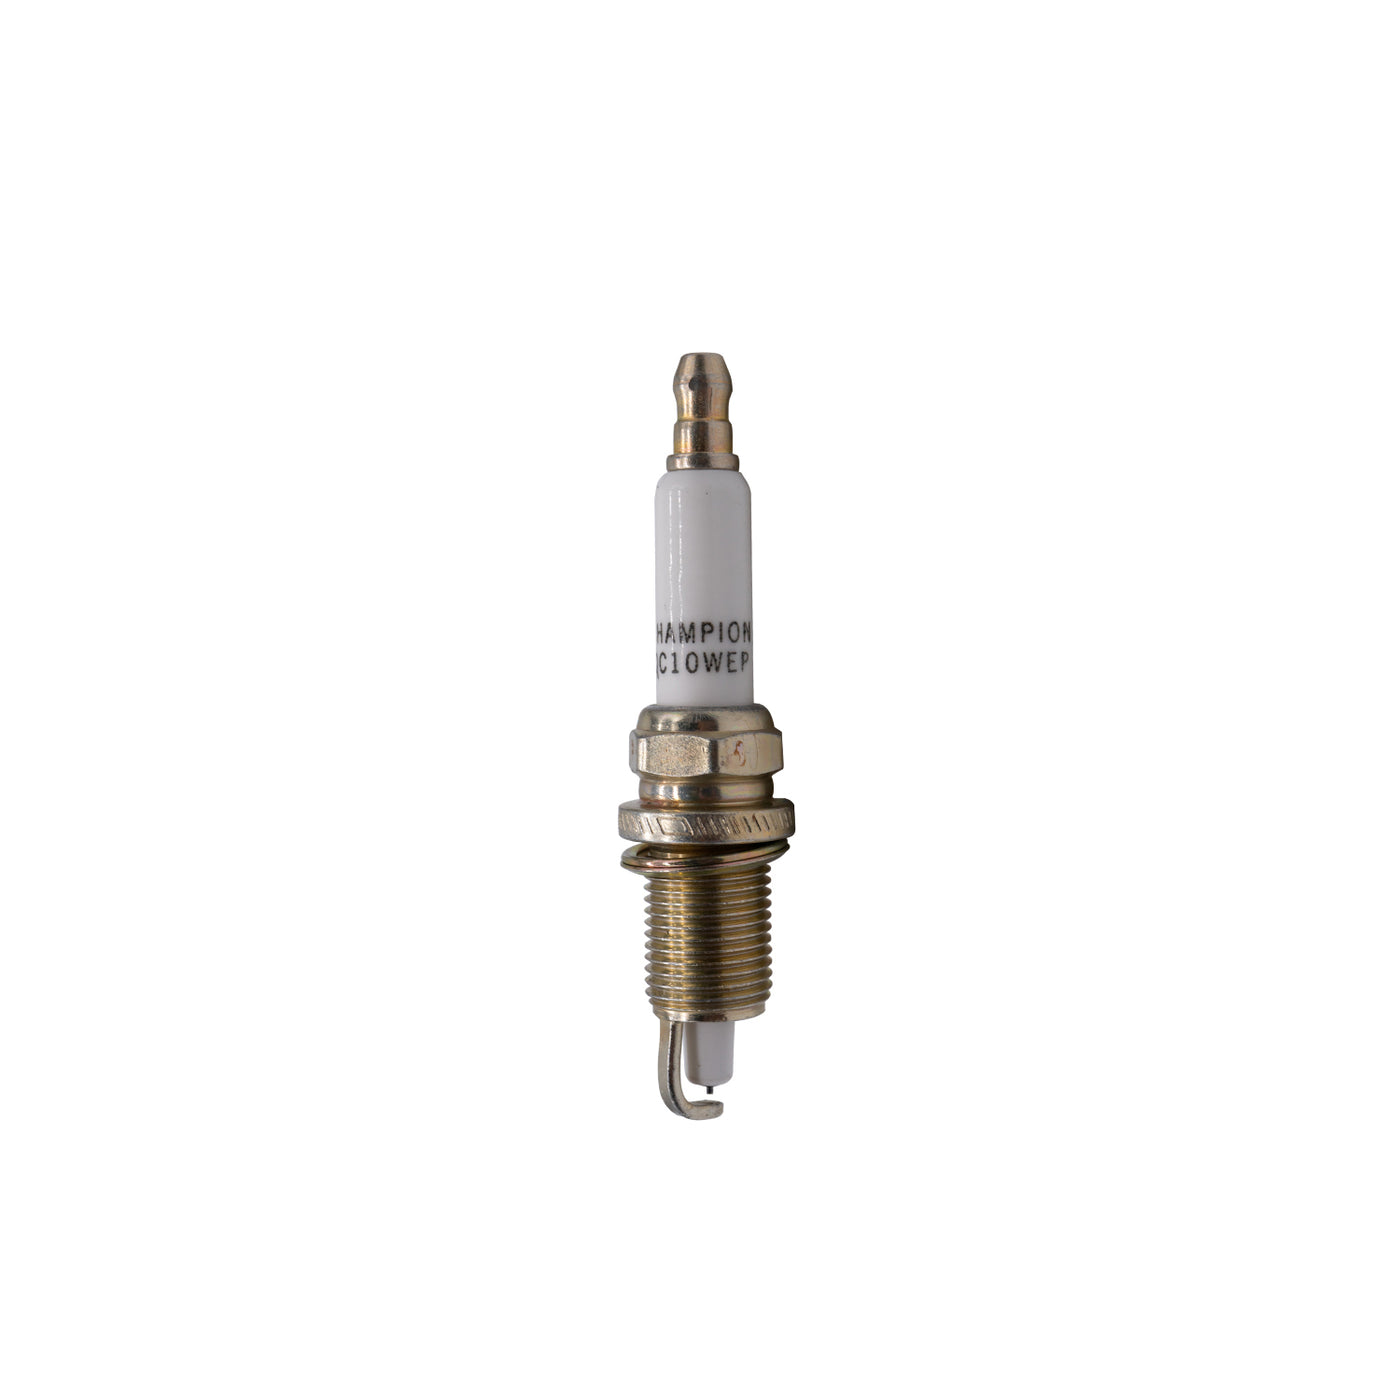 This is a Champion 9005 QC10WEP Spark Plug for Evinrude E-TEC 2-Stroke outboard motors (5007419).